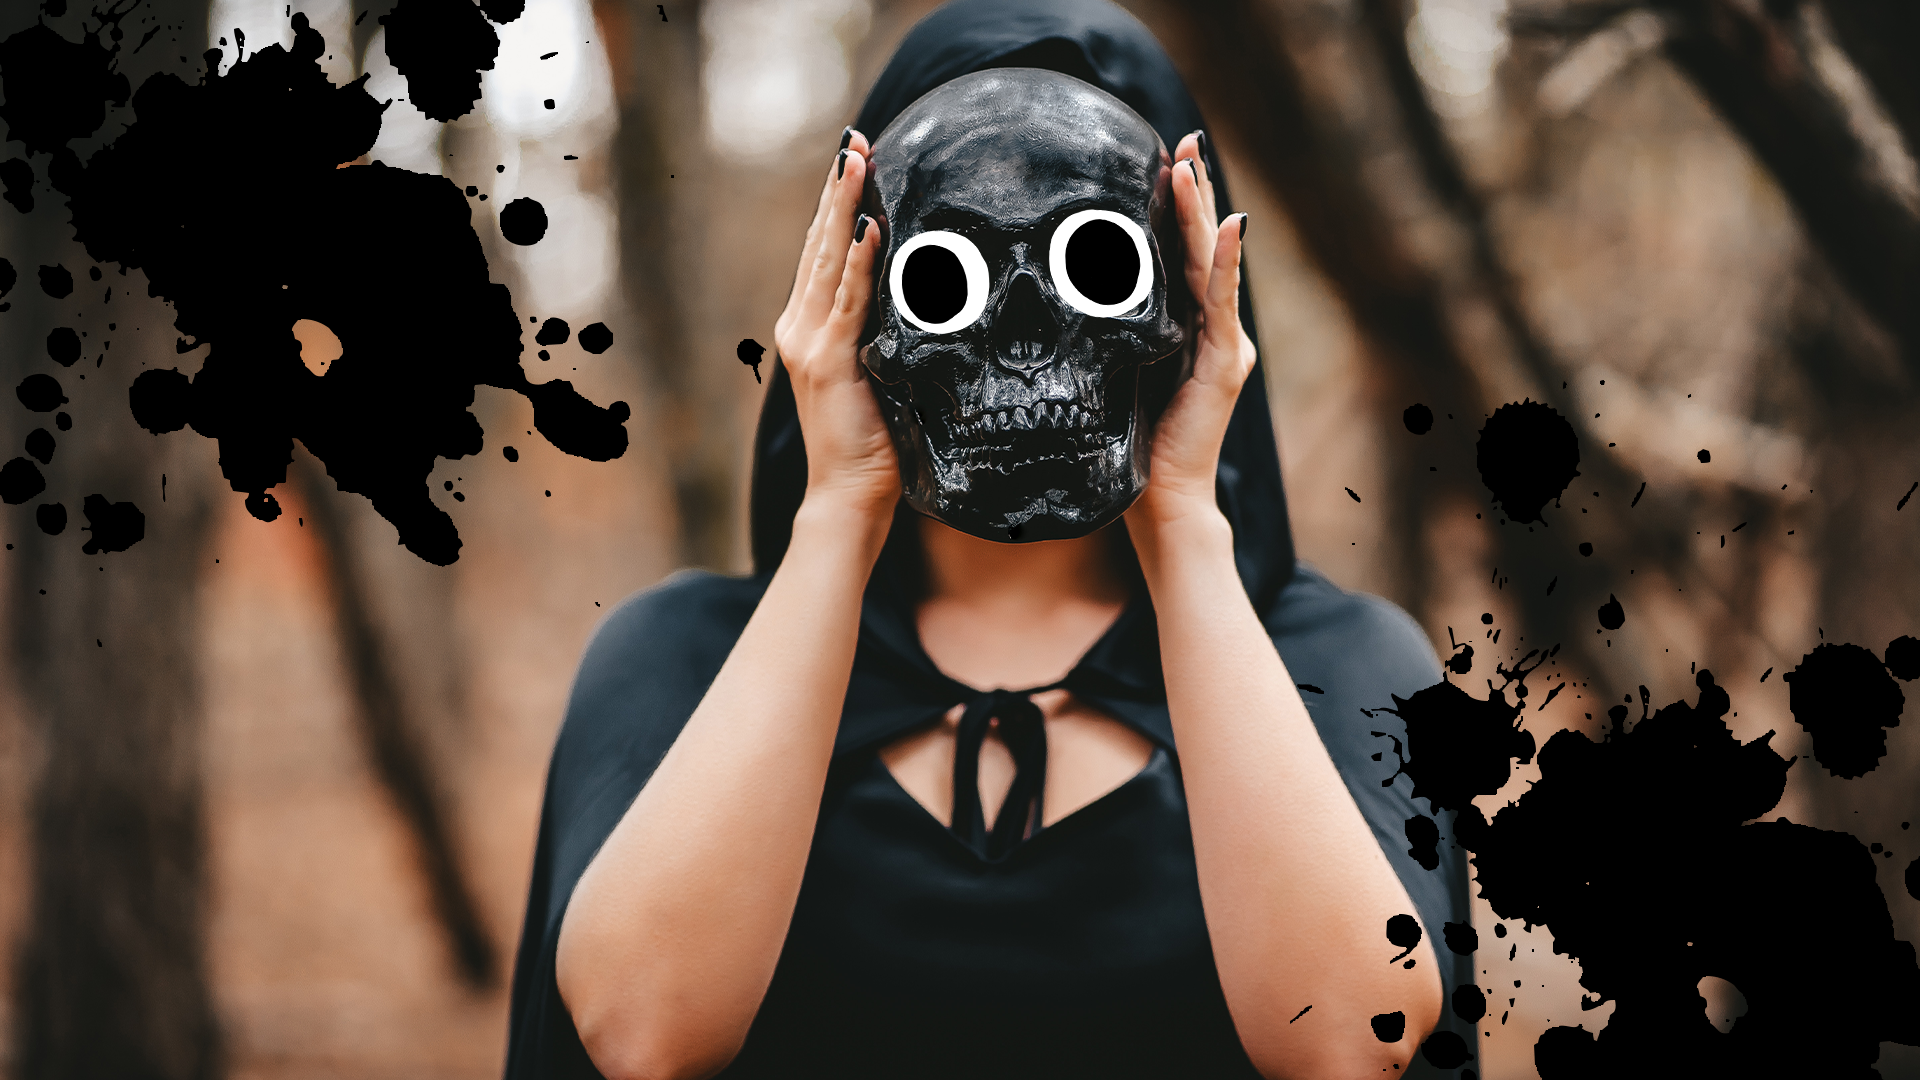 Spooky woman in skull mask with splats